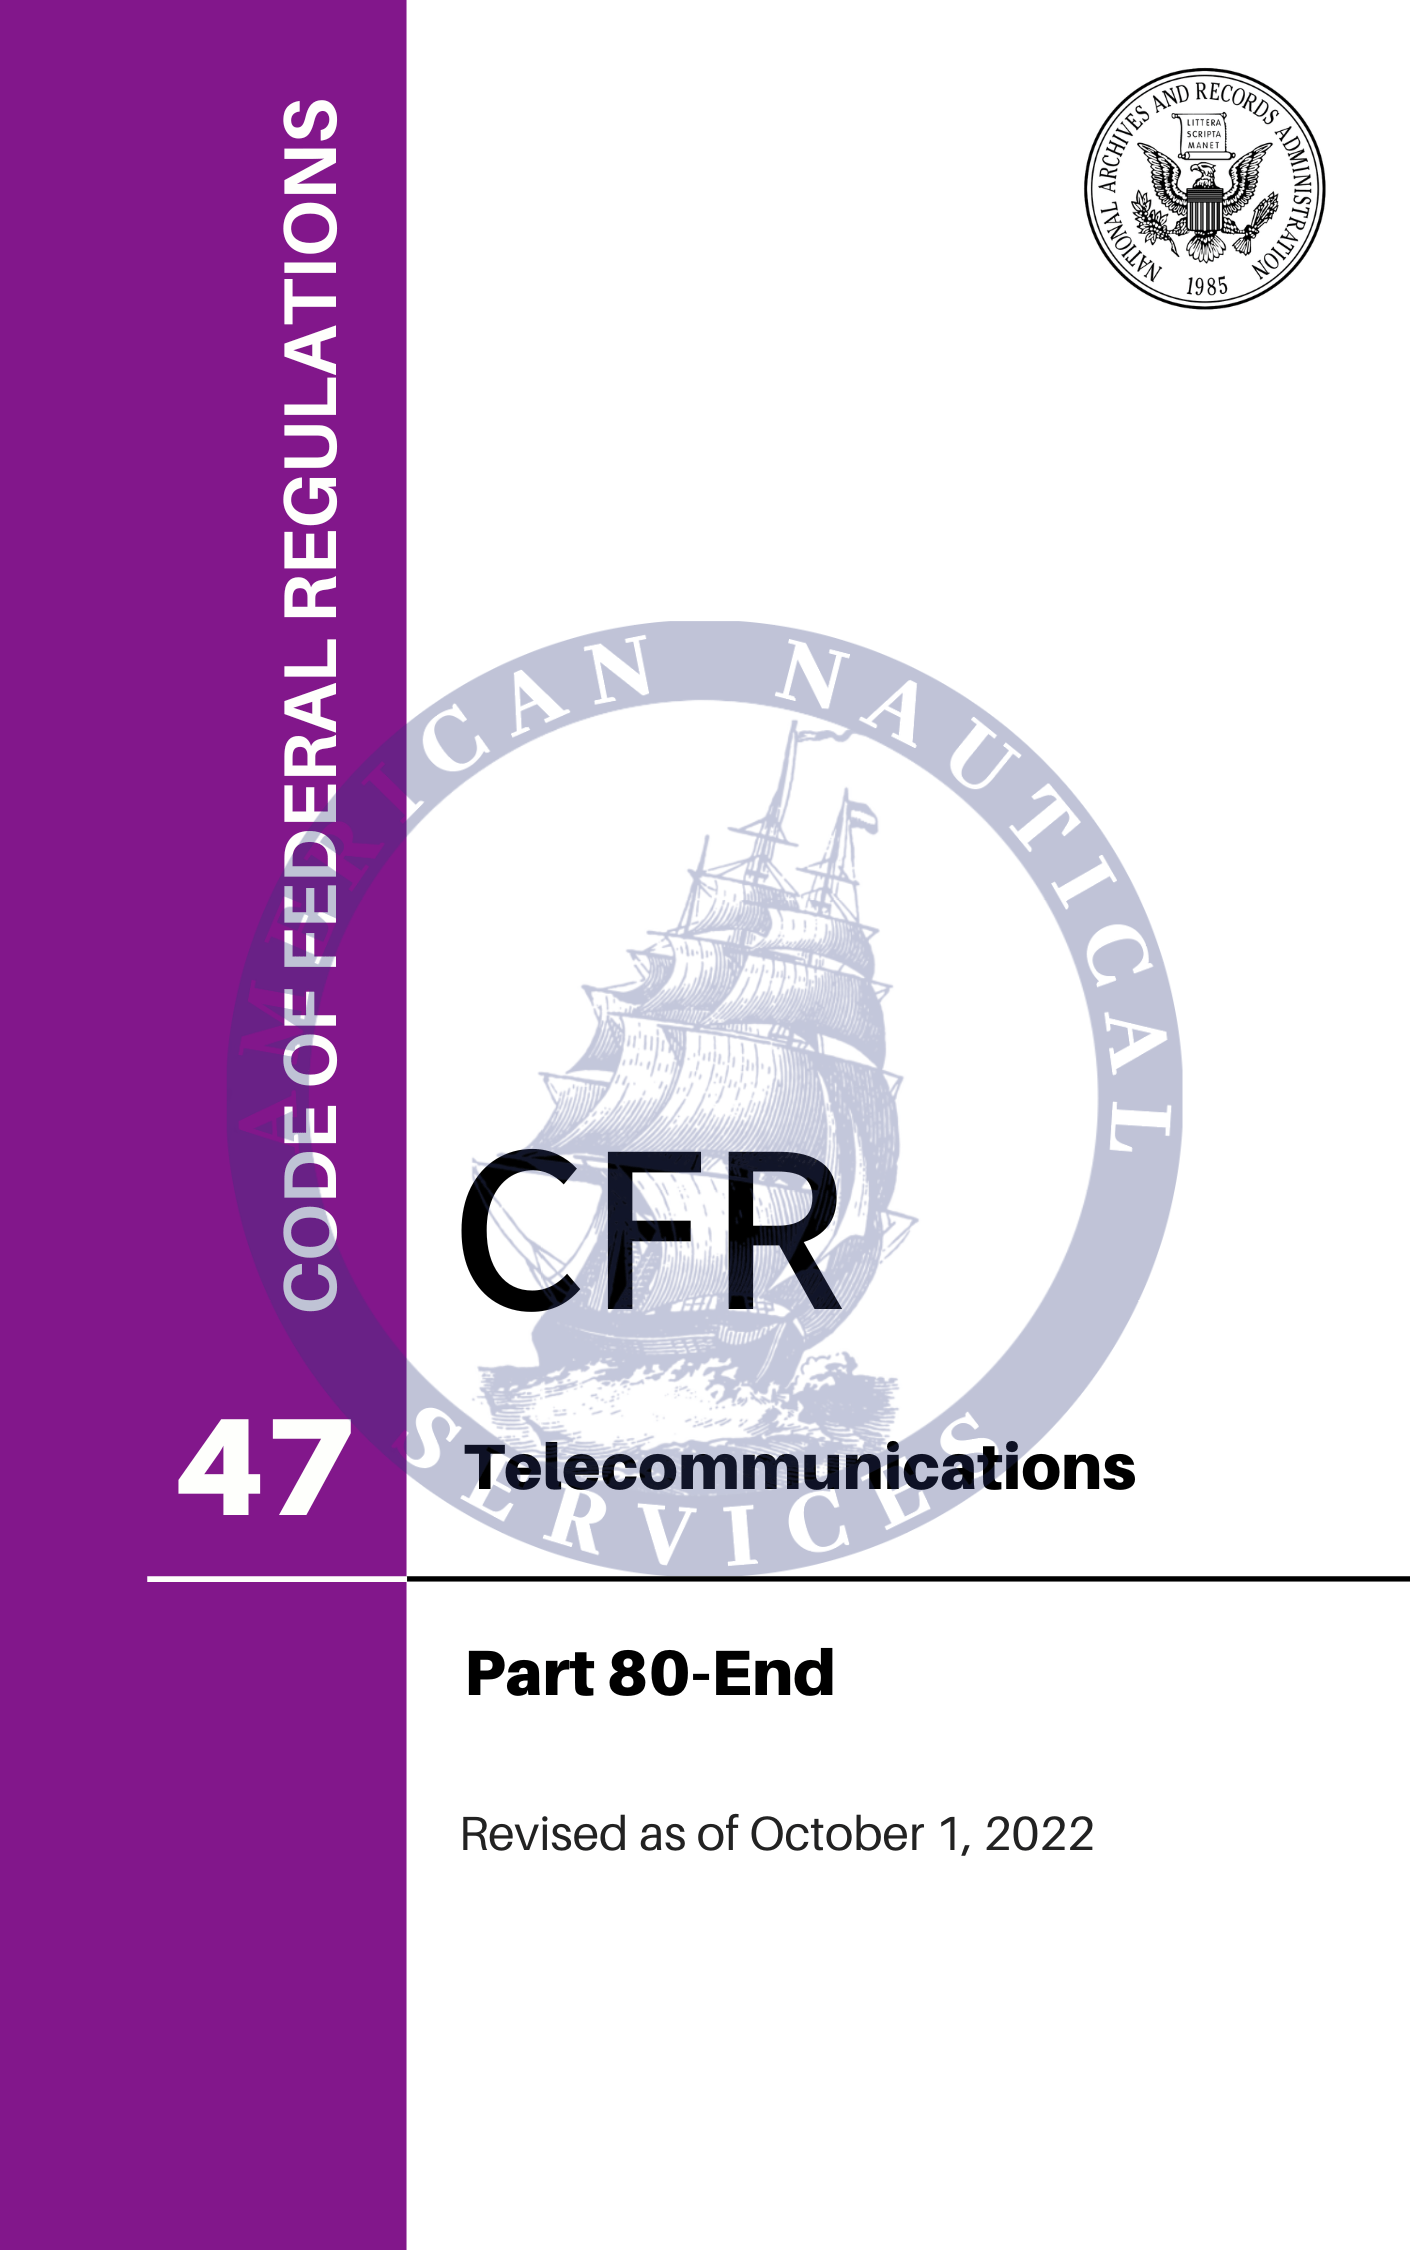 CFR Title 47: Parts 80-End - Telecommunications (Code of Federal Regulations), Revised as of October 1, 2022